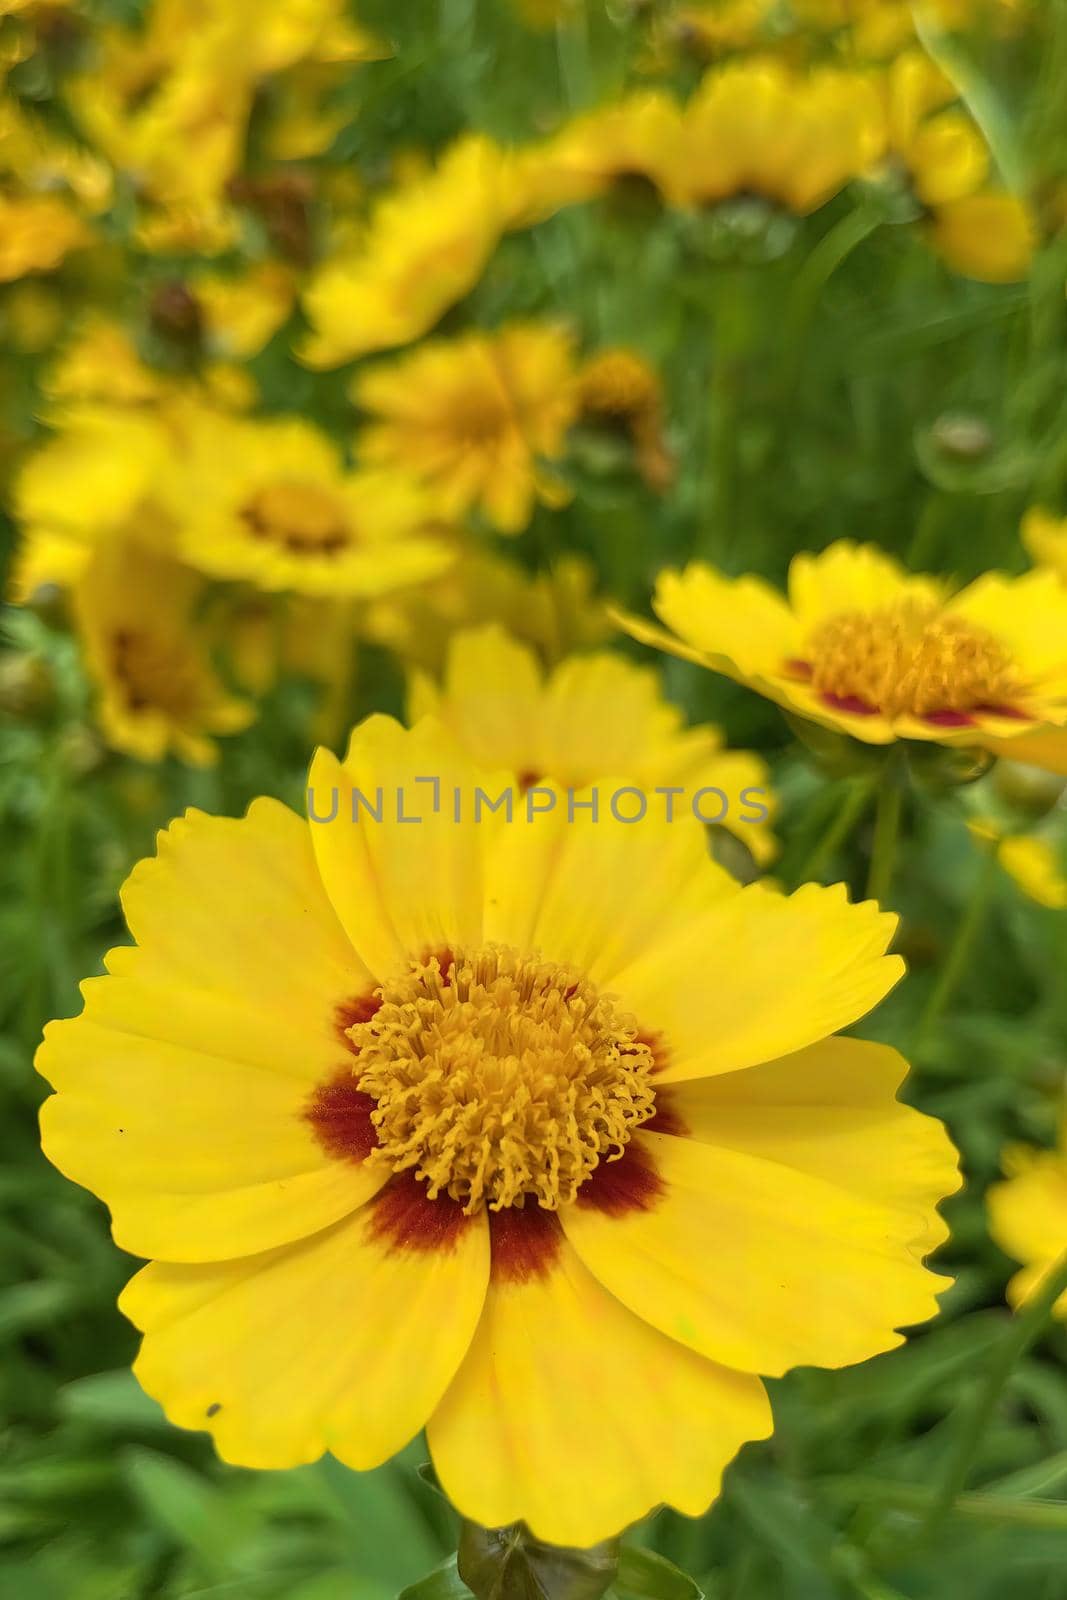 Coreopsis is a genus of flowering plants in the family Asteraceae. Common names include calliopsis and tickseed, a name shared with various other plants.